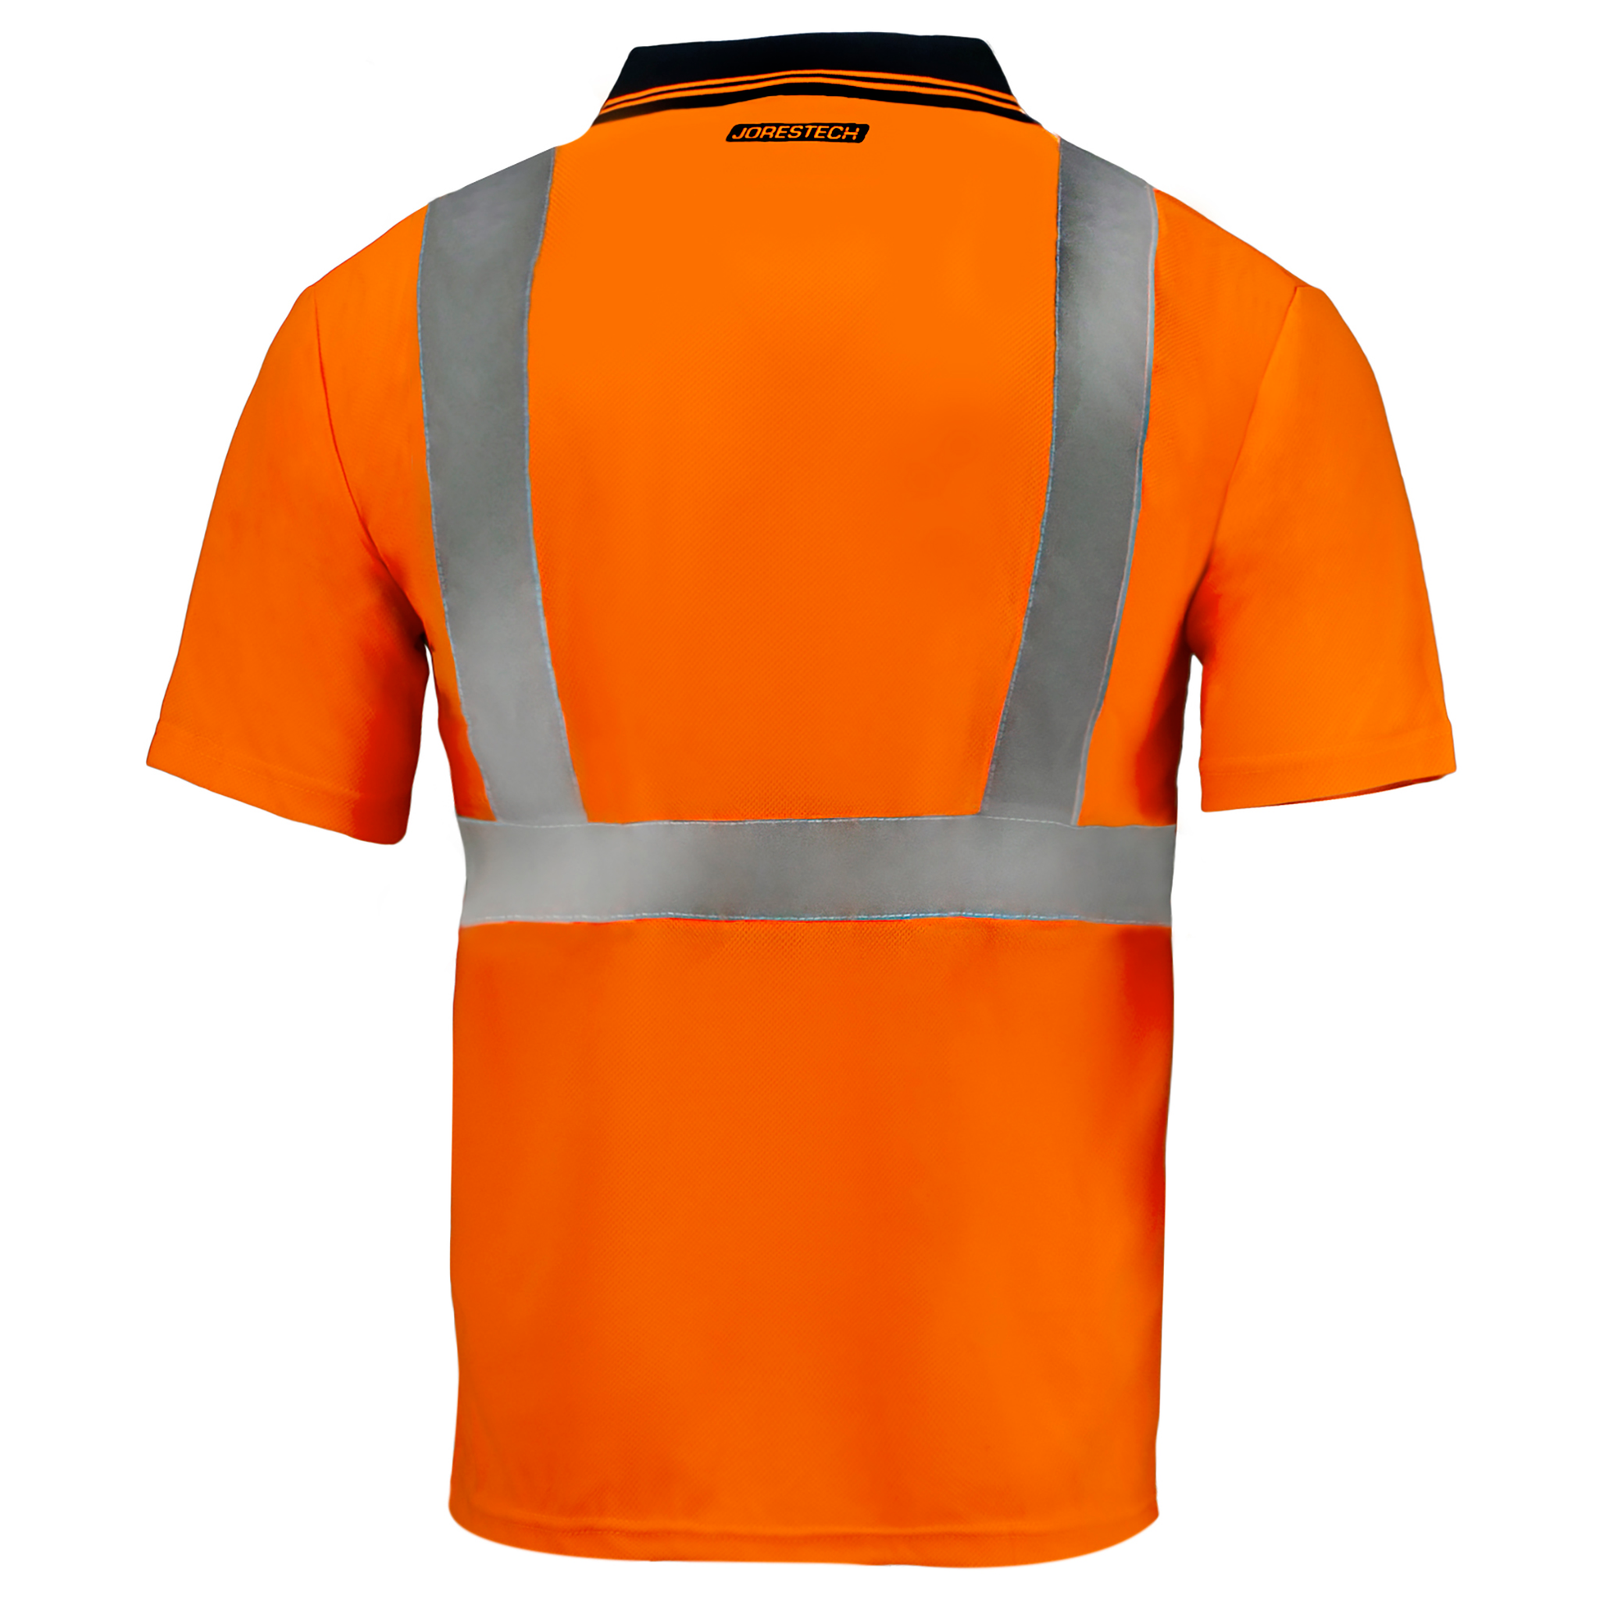 Back view of a Hi-vis orange reflective safety polo shirt class 2 type R. The shirt is short sleeve, has a polo collar